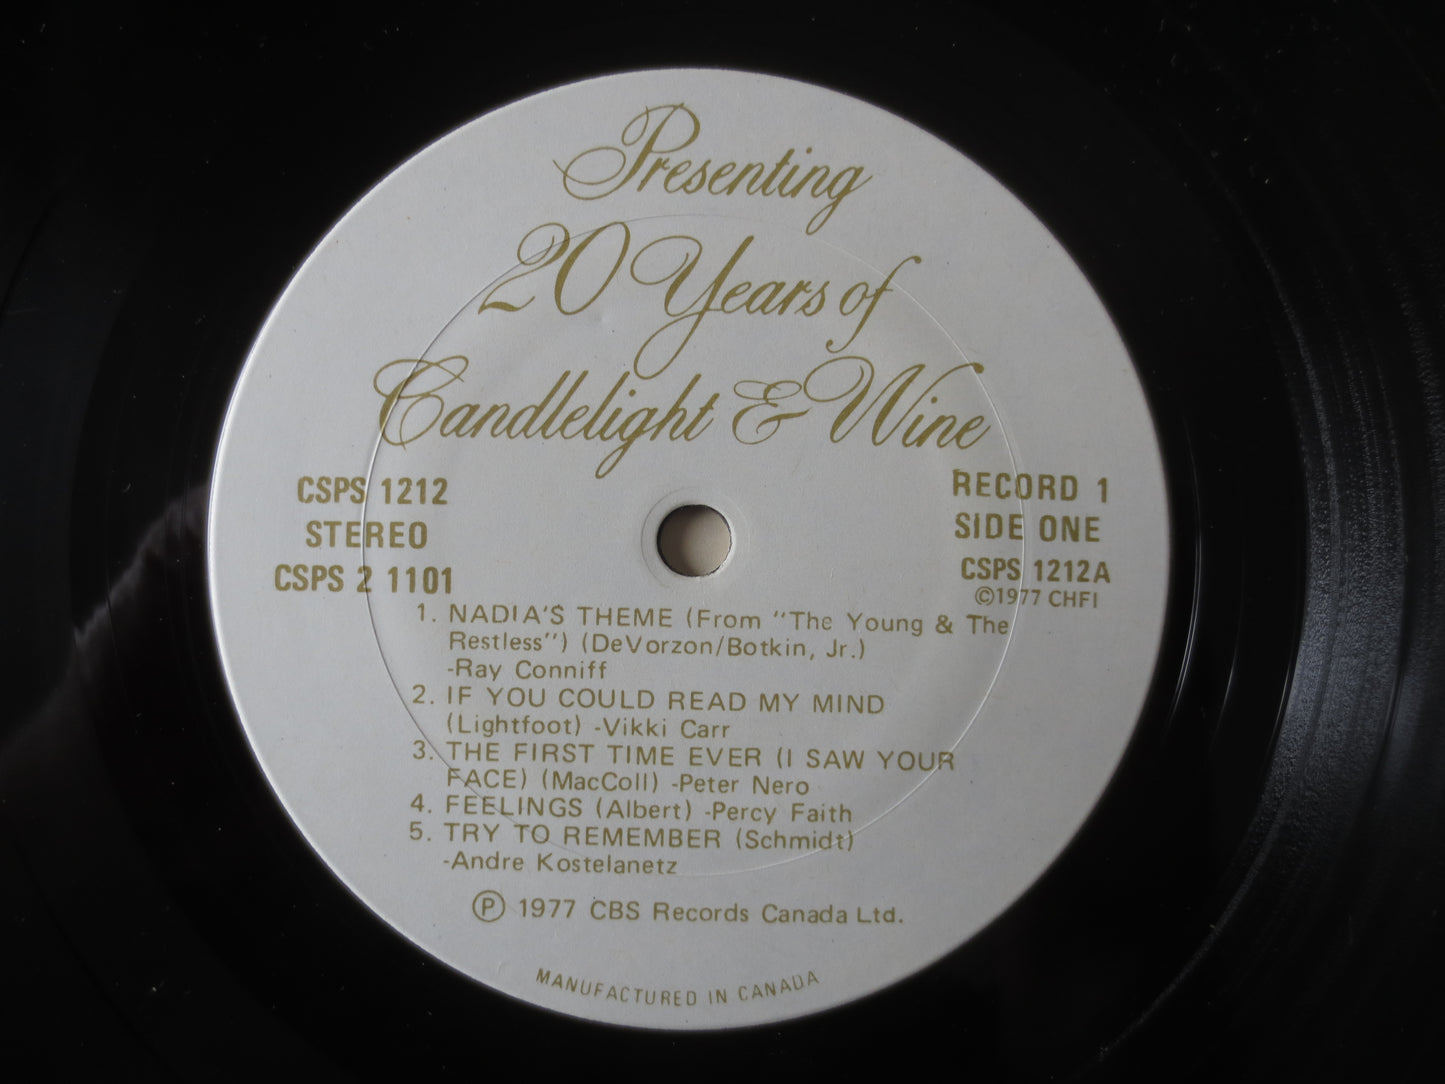 CANDLELIGHT and WINE, ROMANTIC Music, Peter Nero Records, Vintage Vinyl, Record Vinyl, Records, Vinyl Albums, 1978 Records